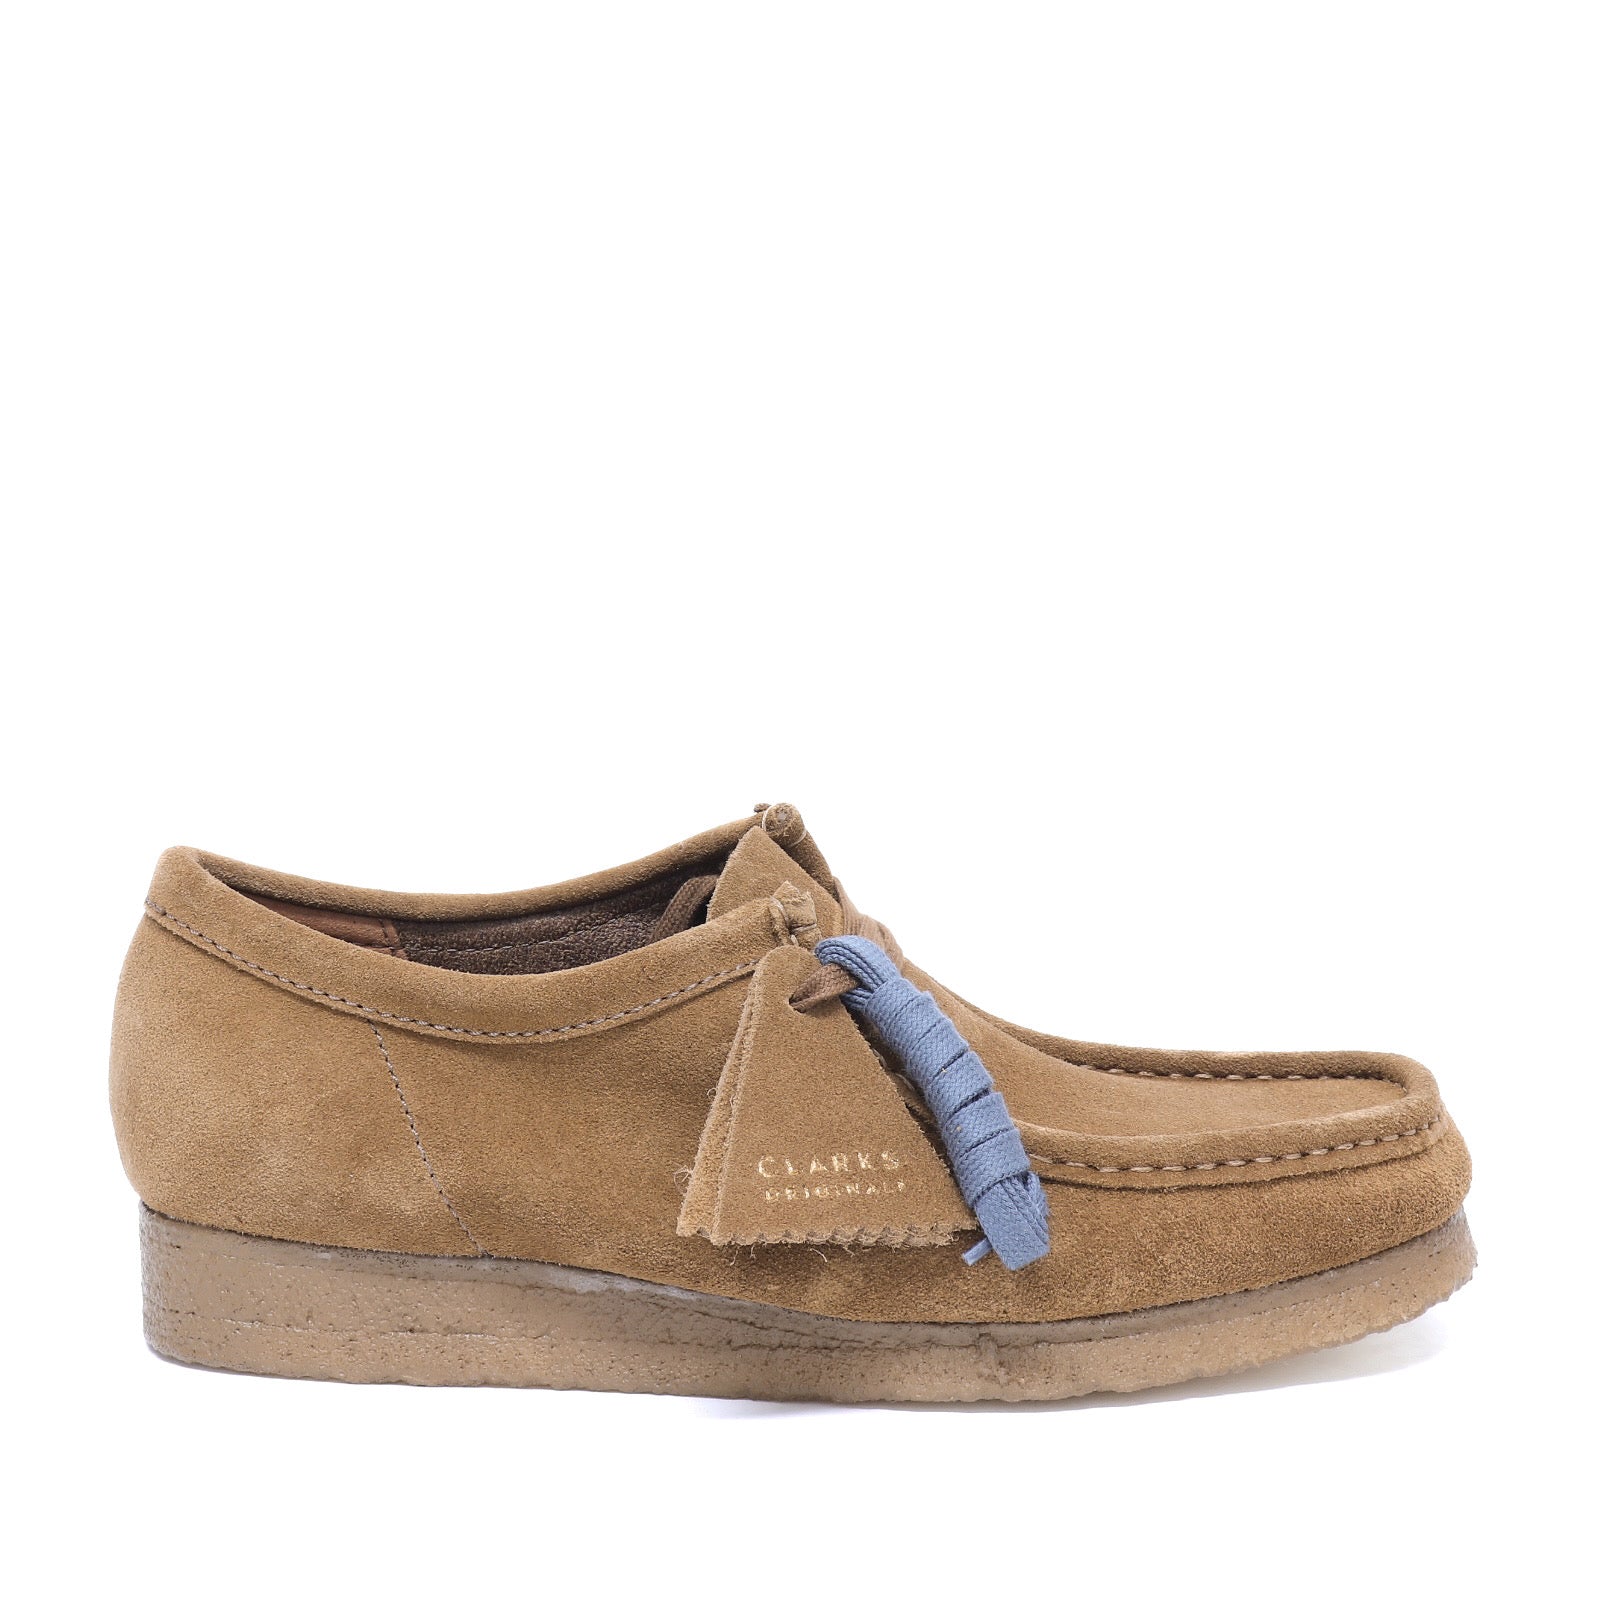 Clark's Wallabee lace-up